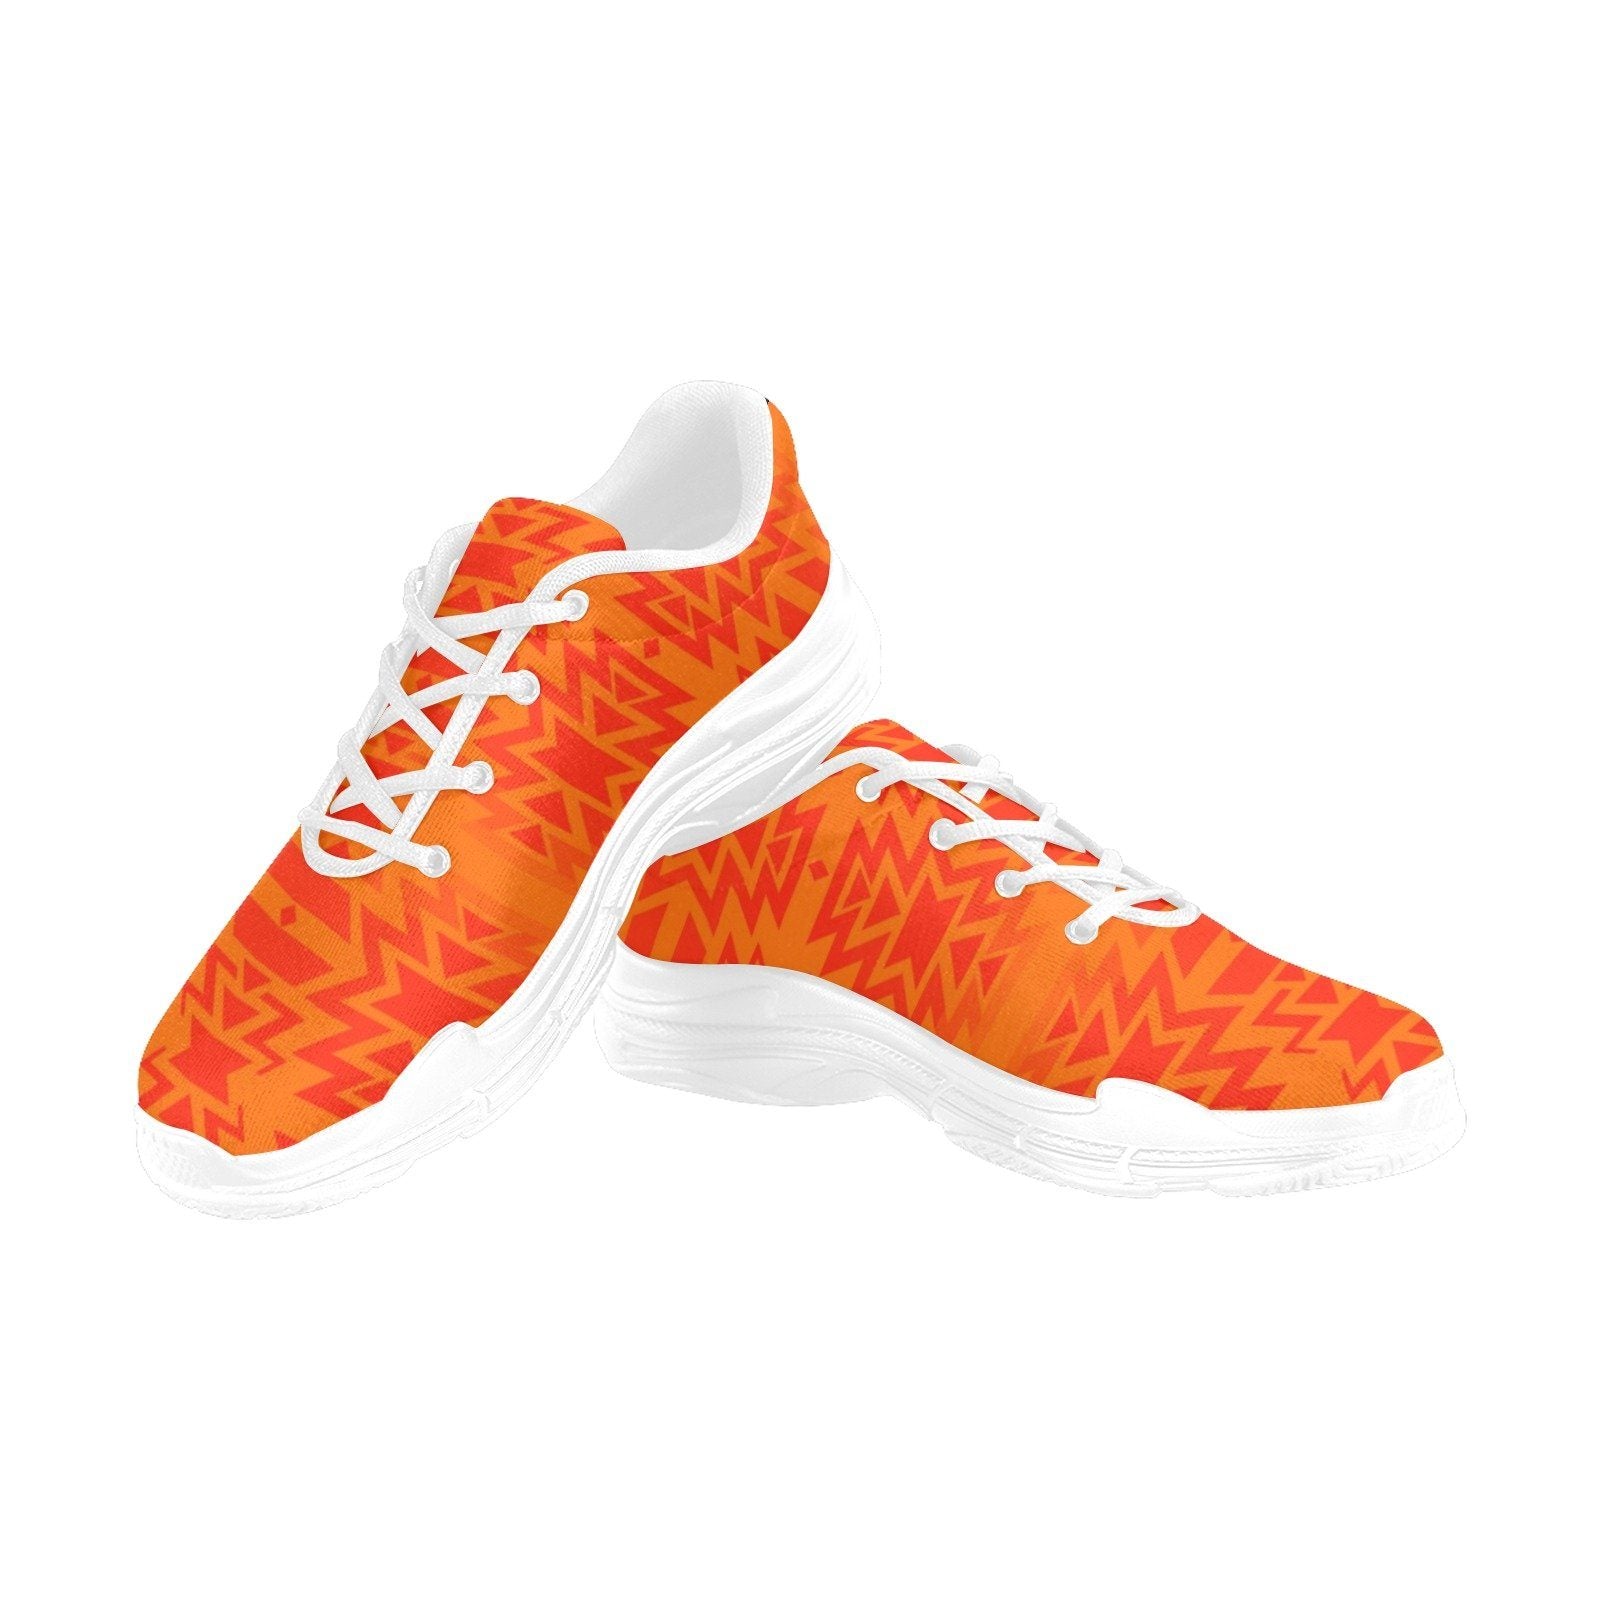 Fire Colors and Turquoise Orange Chunky Men's Running Shoes Artsadd US5 White Sole 